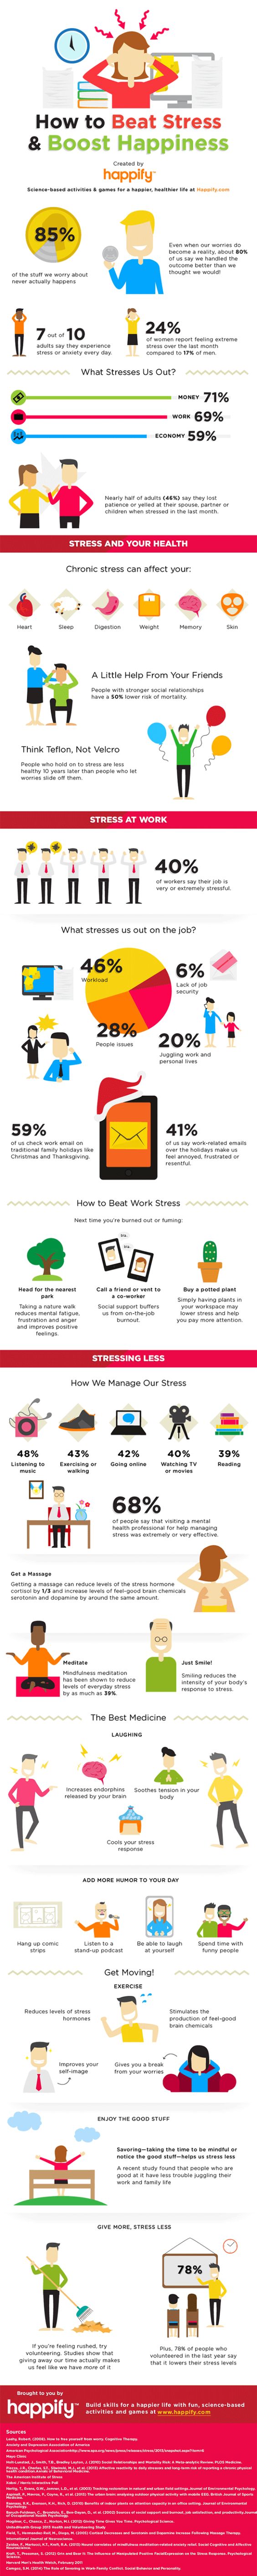 How to beat stress